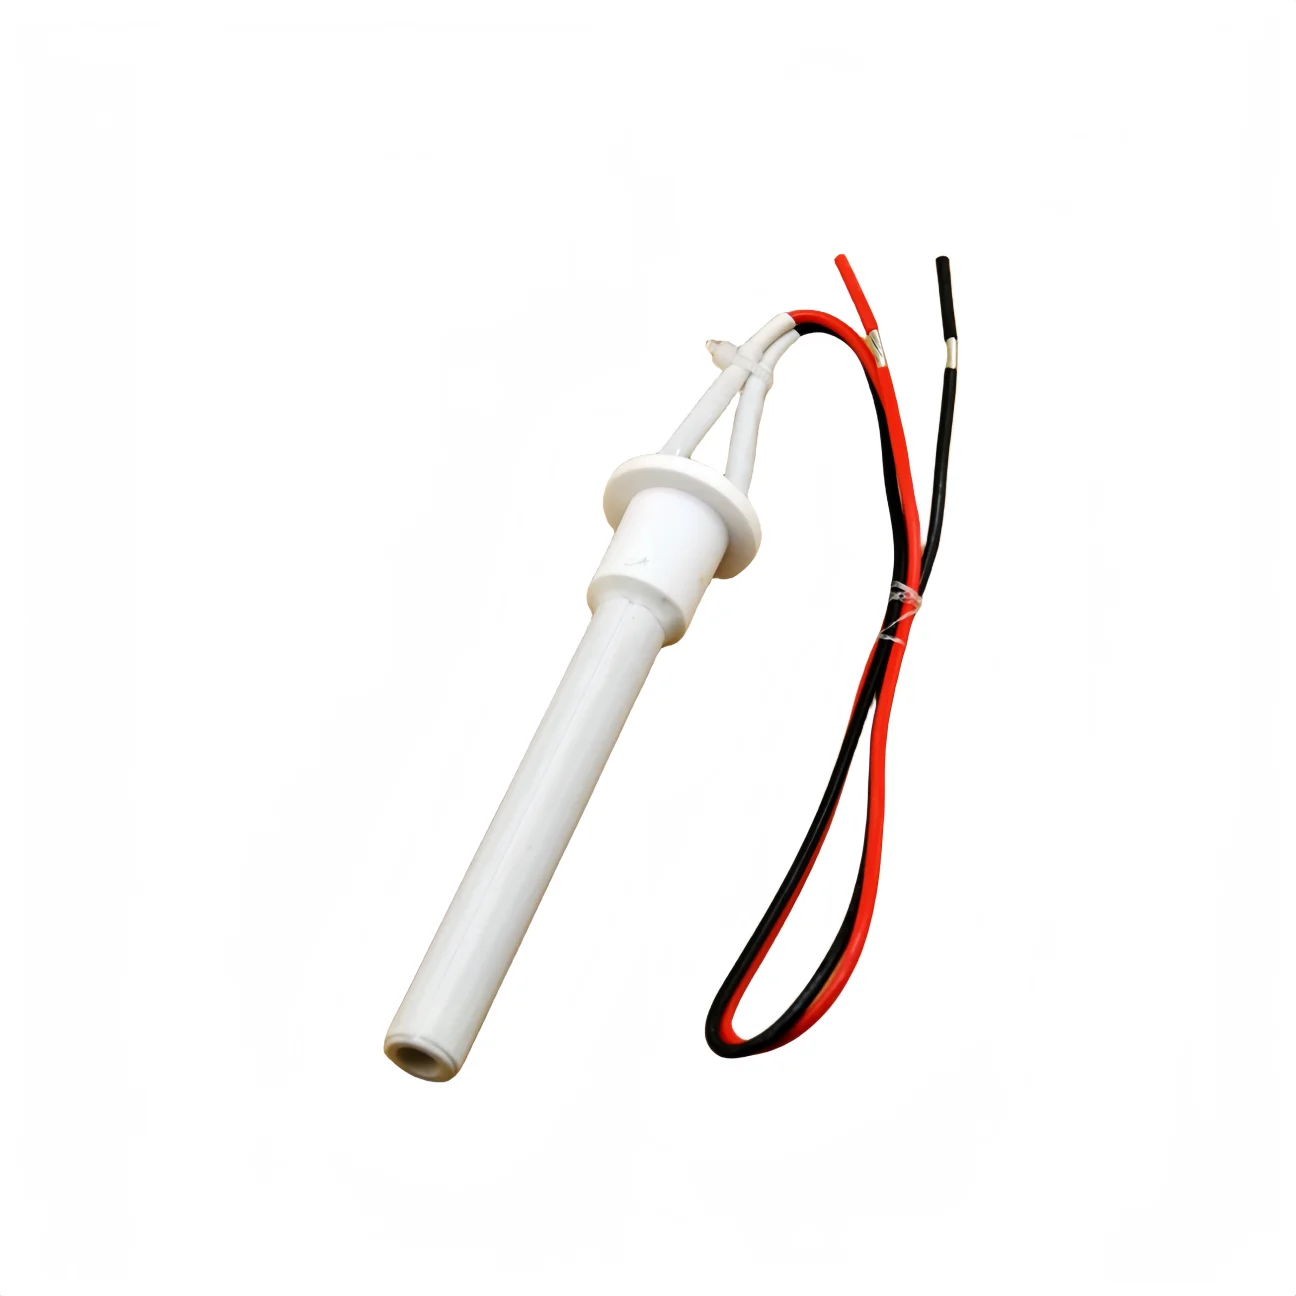 220V 350W Ceramic Igniter wood pellet oven Ignition rod, biofuel heater fast Ignition energy saving, high efficiency